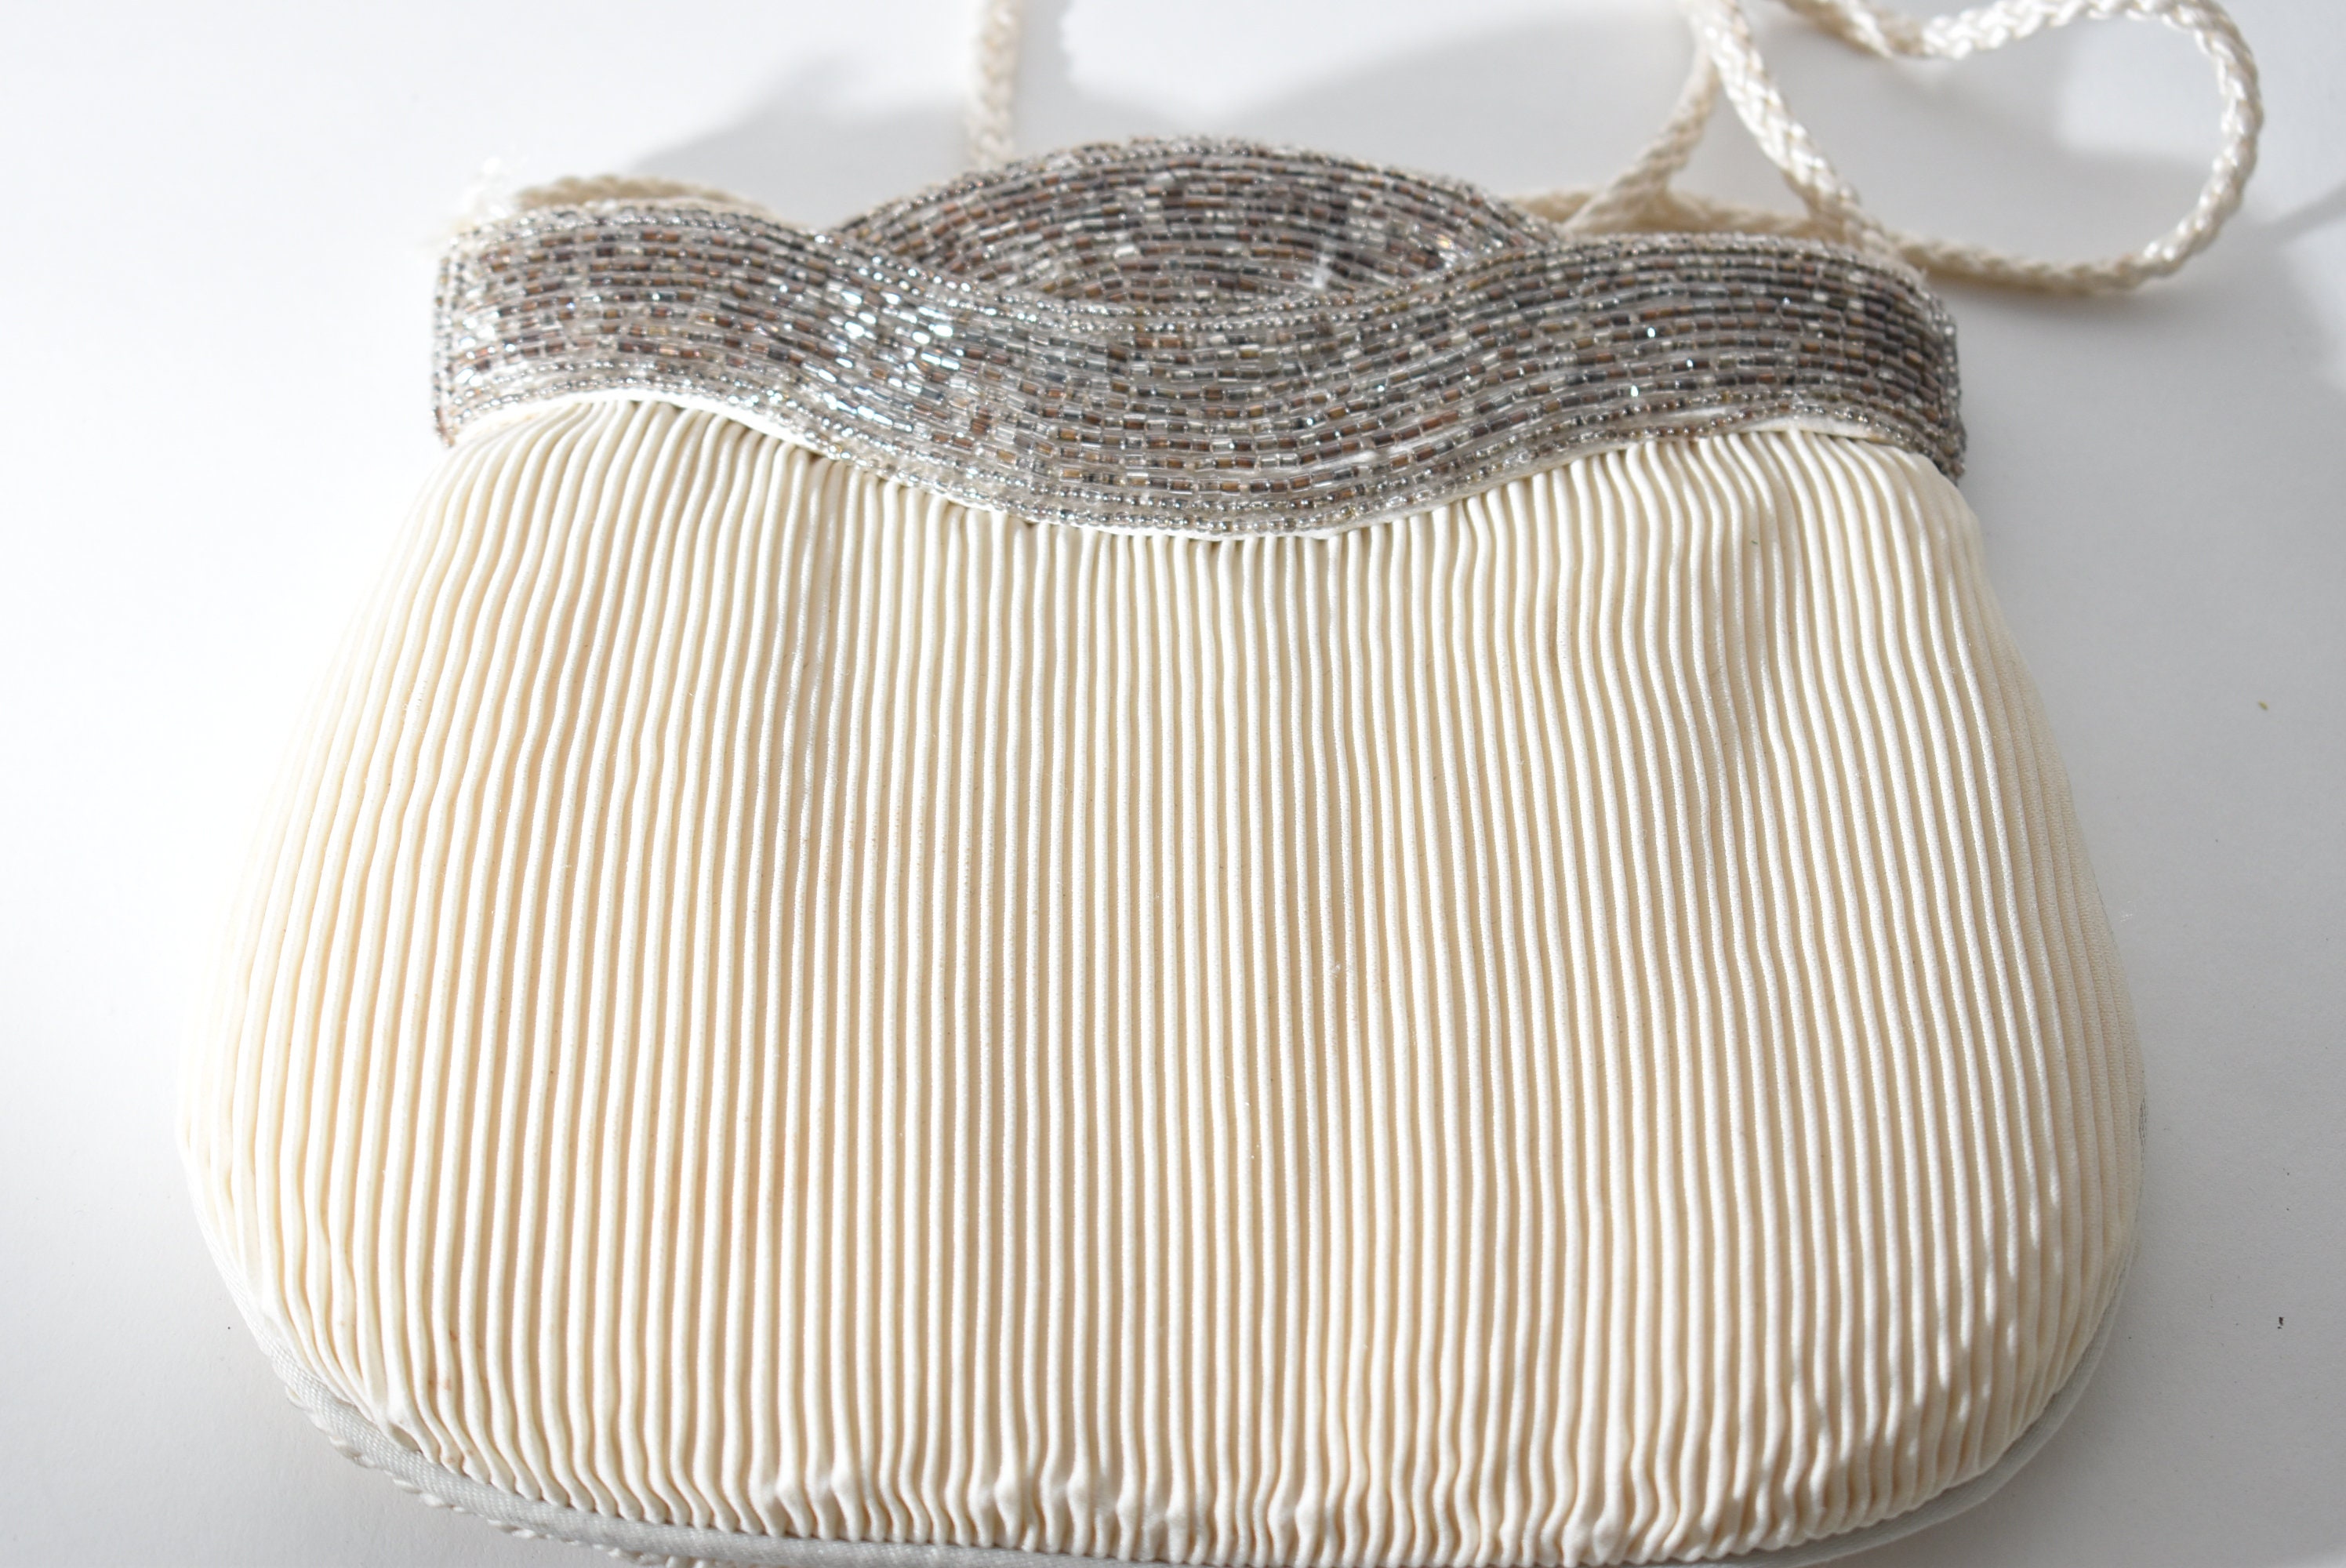 vintage beaded evening bags